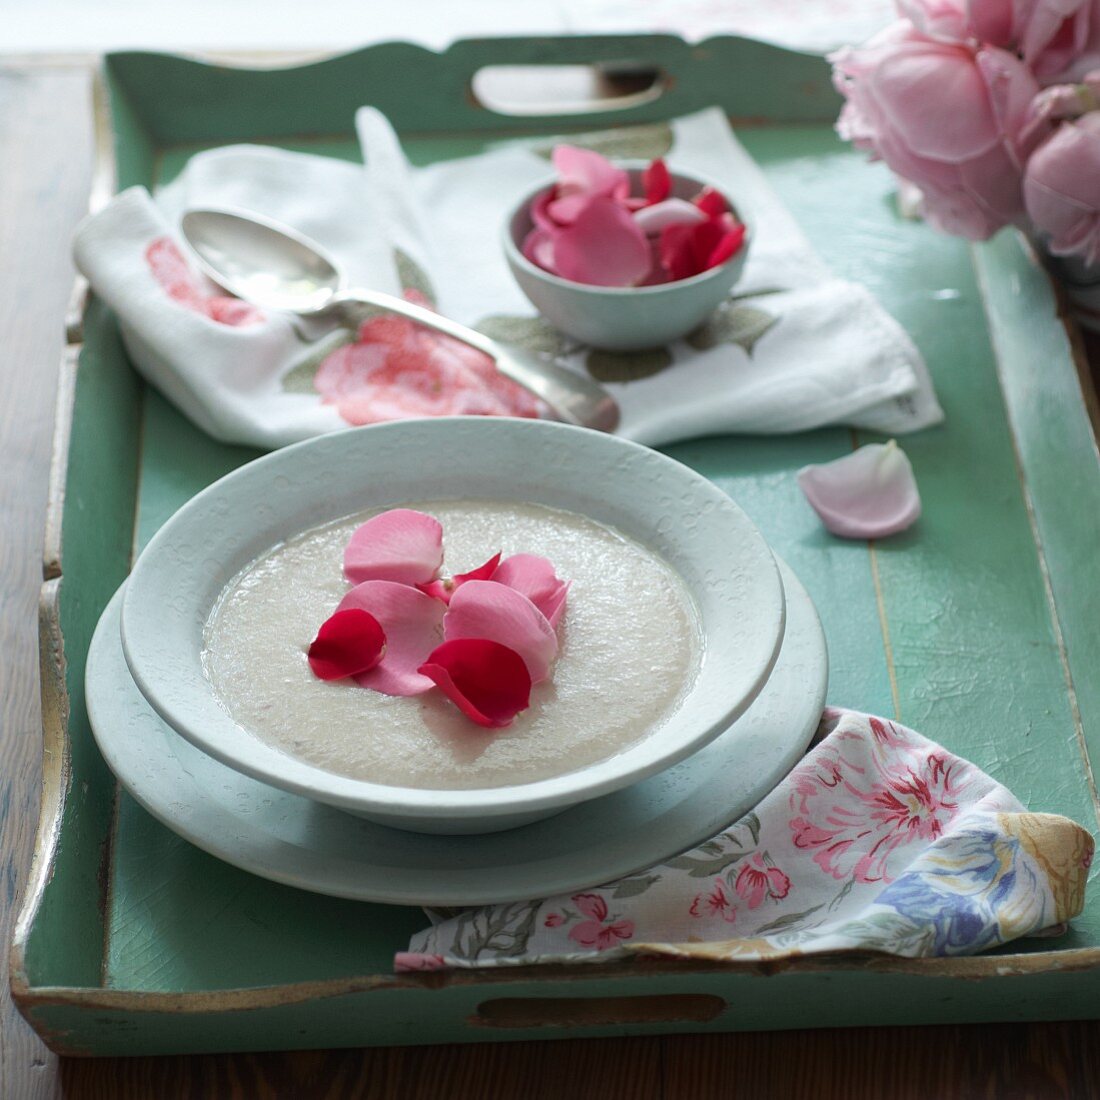 Soup with rose petals on a tray